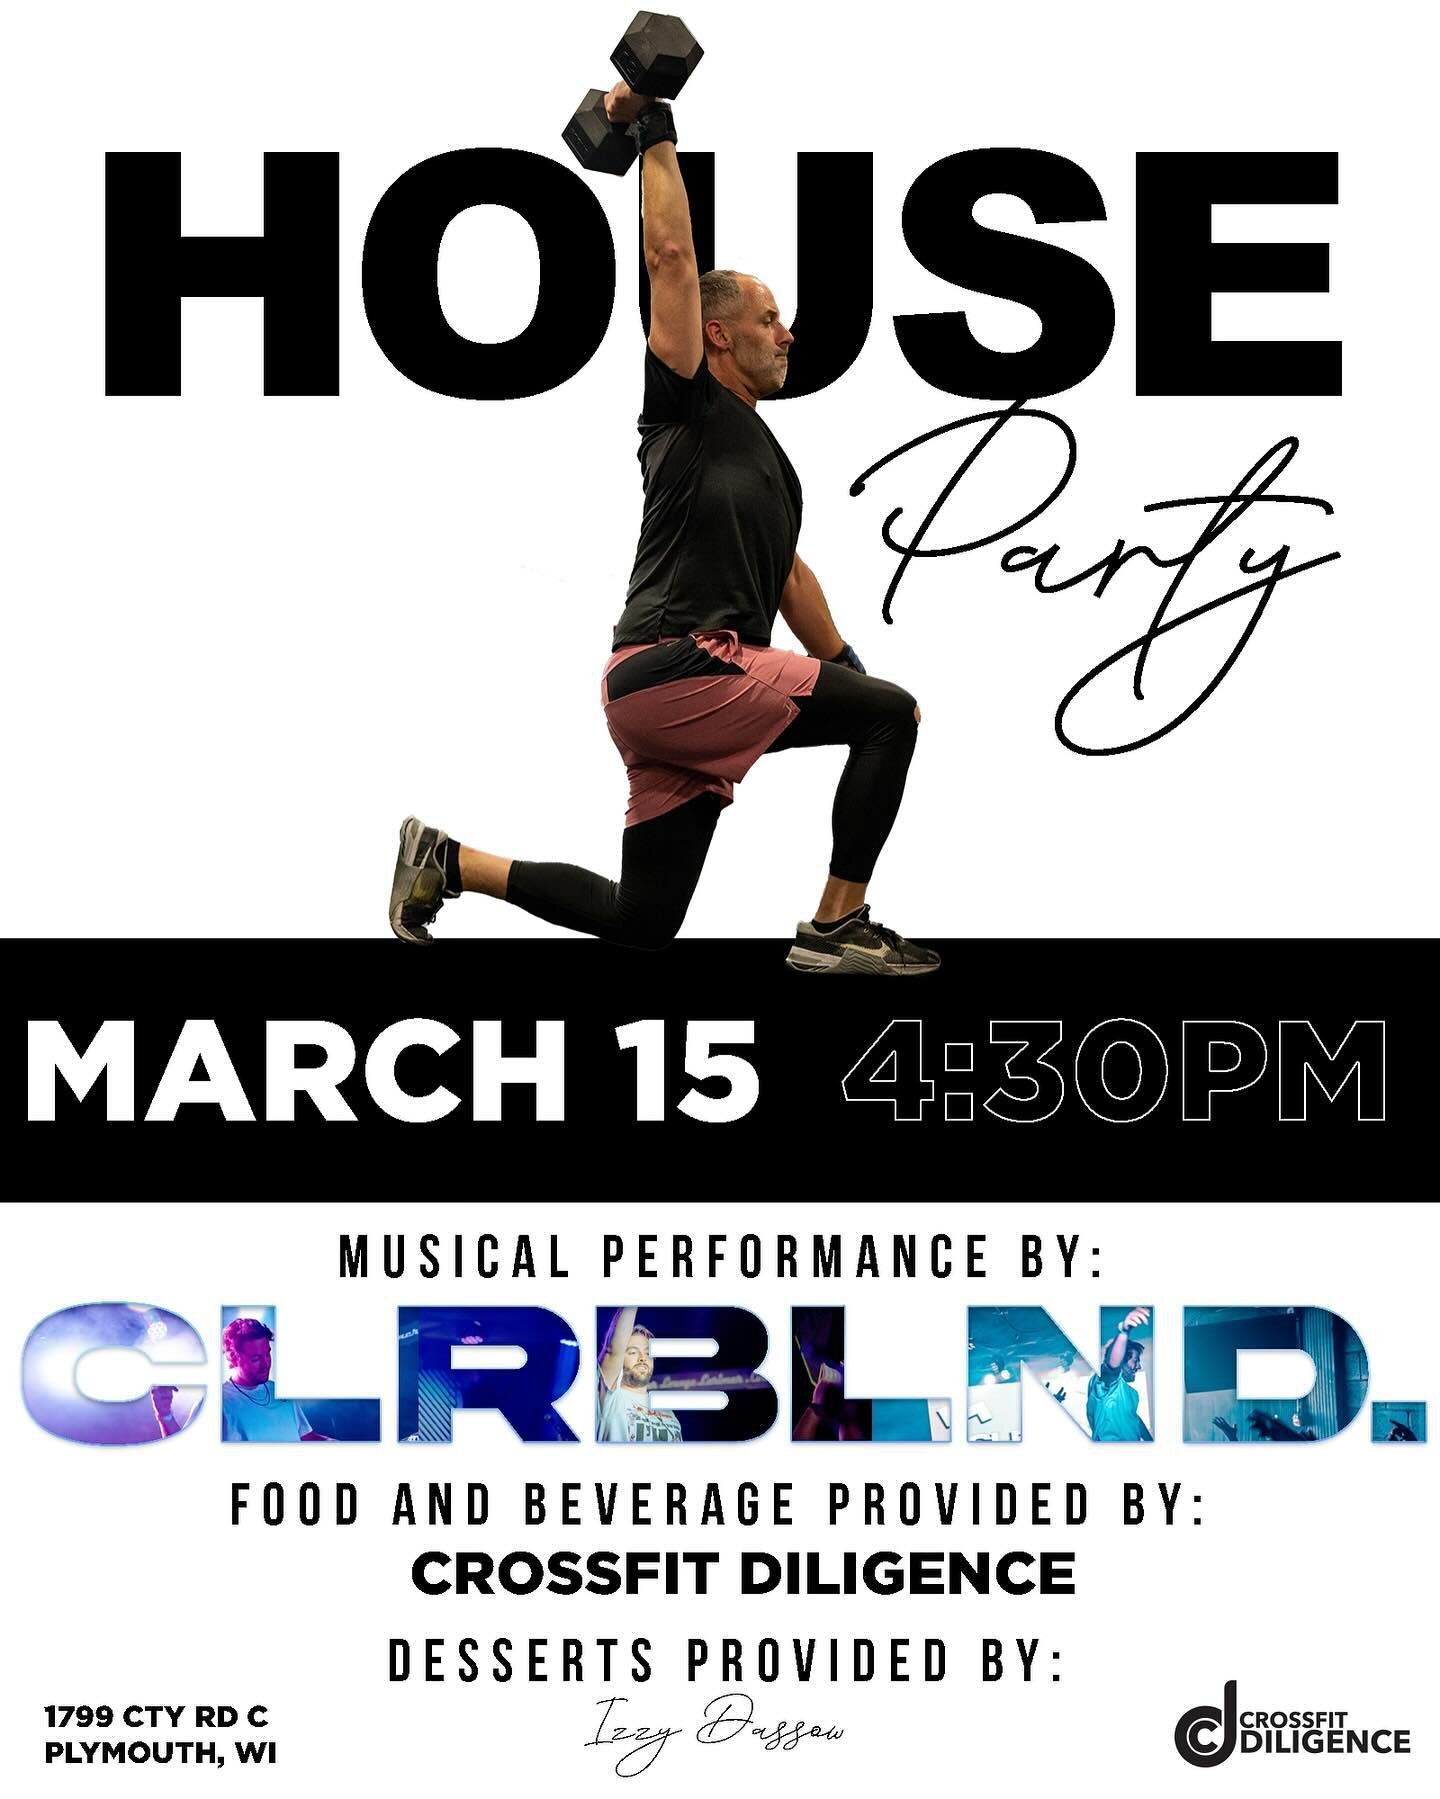 Join us next Friday, March 15th for our House Party. Free workout starts at 4:30pm with food and social to follow. Reach out for more details.